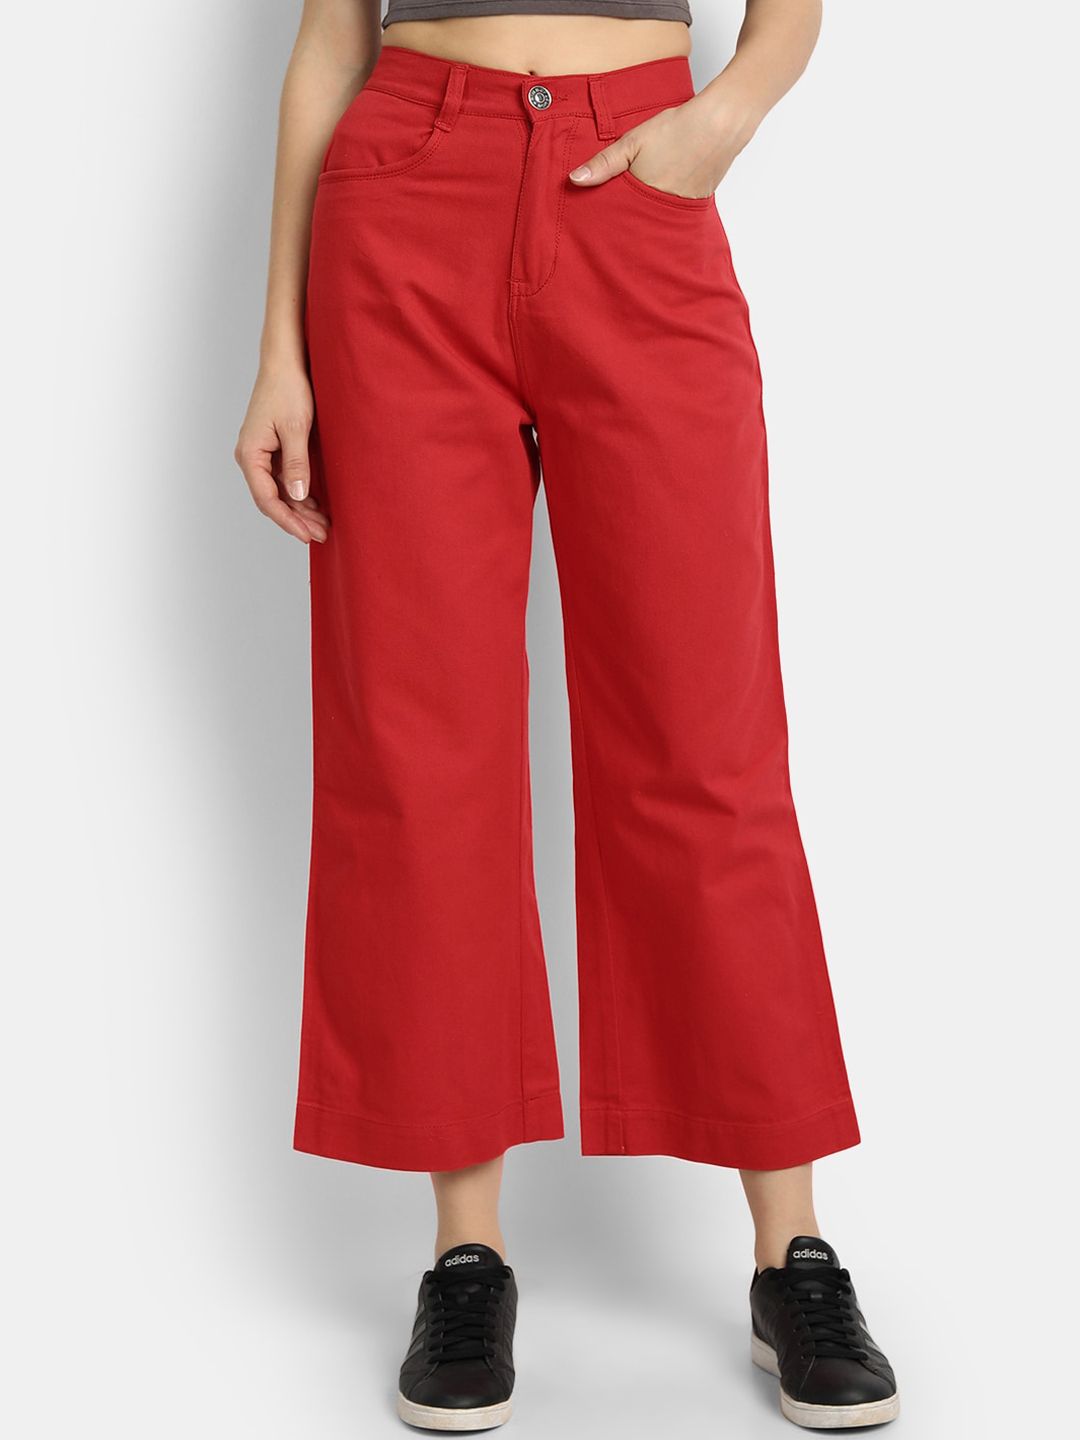 River Of Design Jeans Women Red Wide Leg High-Rise Jeans